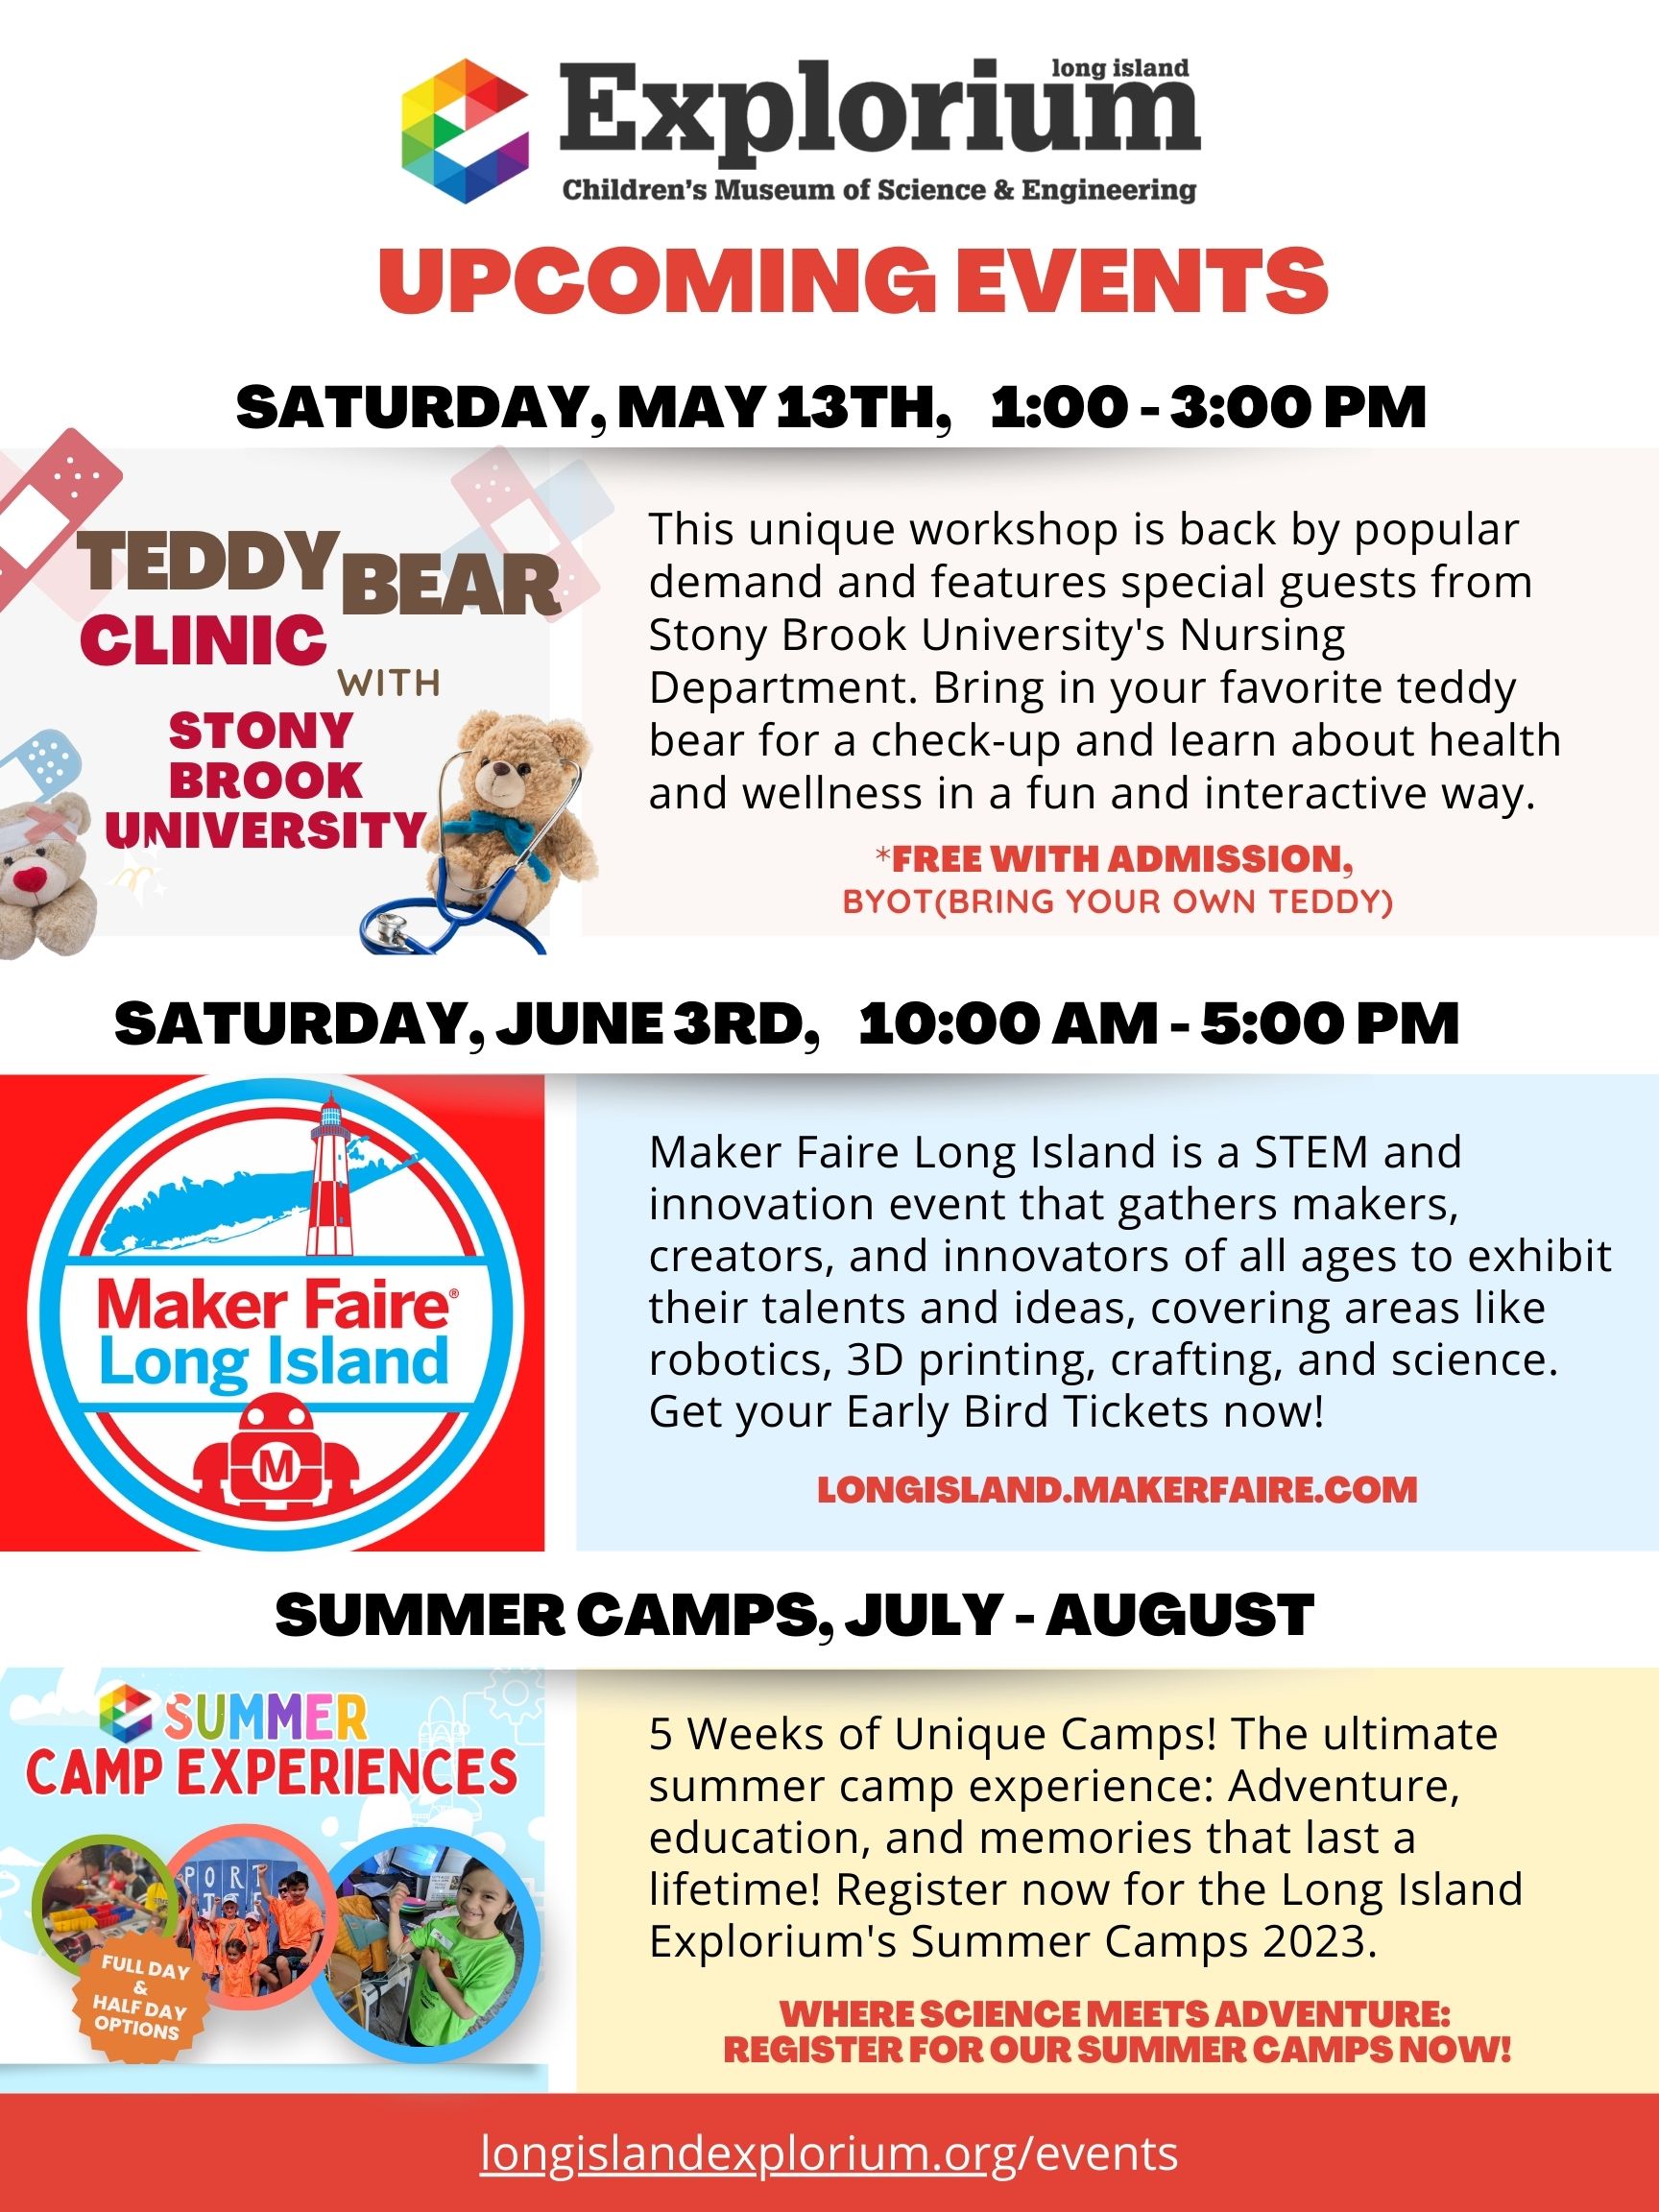 Upcoming Events at the Long Island Explorium for Print - Teddy Bear Clinic, Maker Faire, Summer Camps